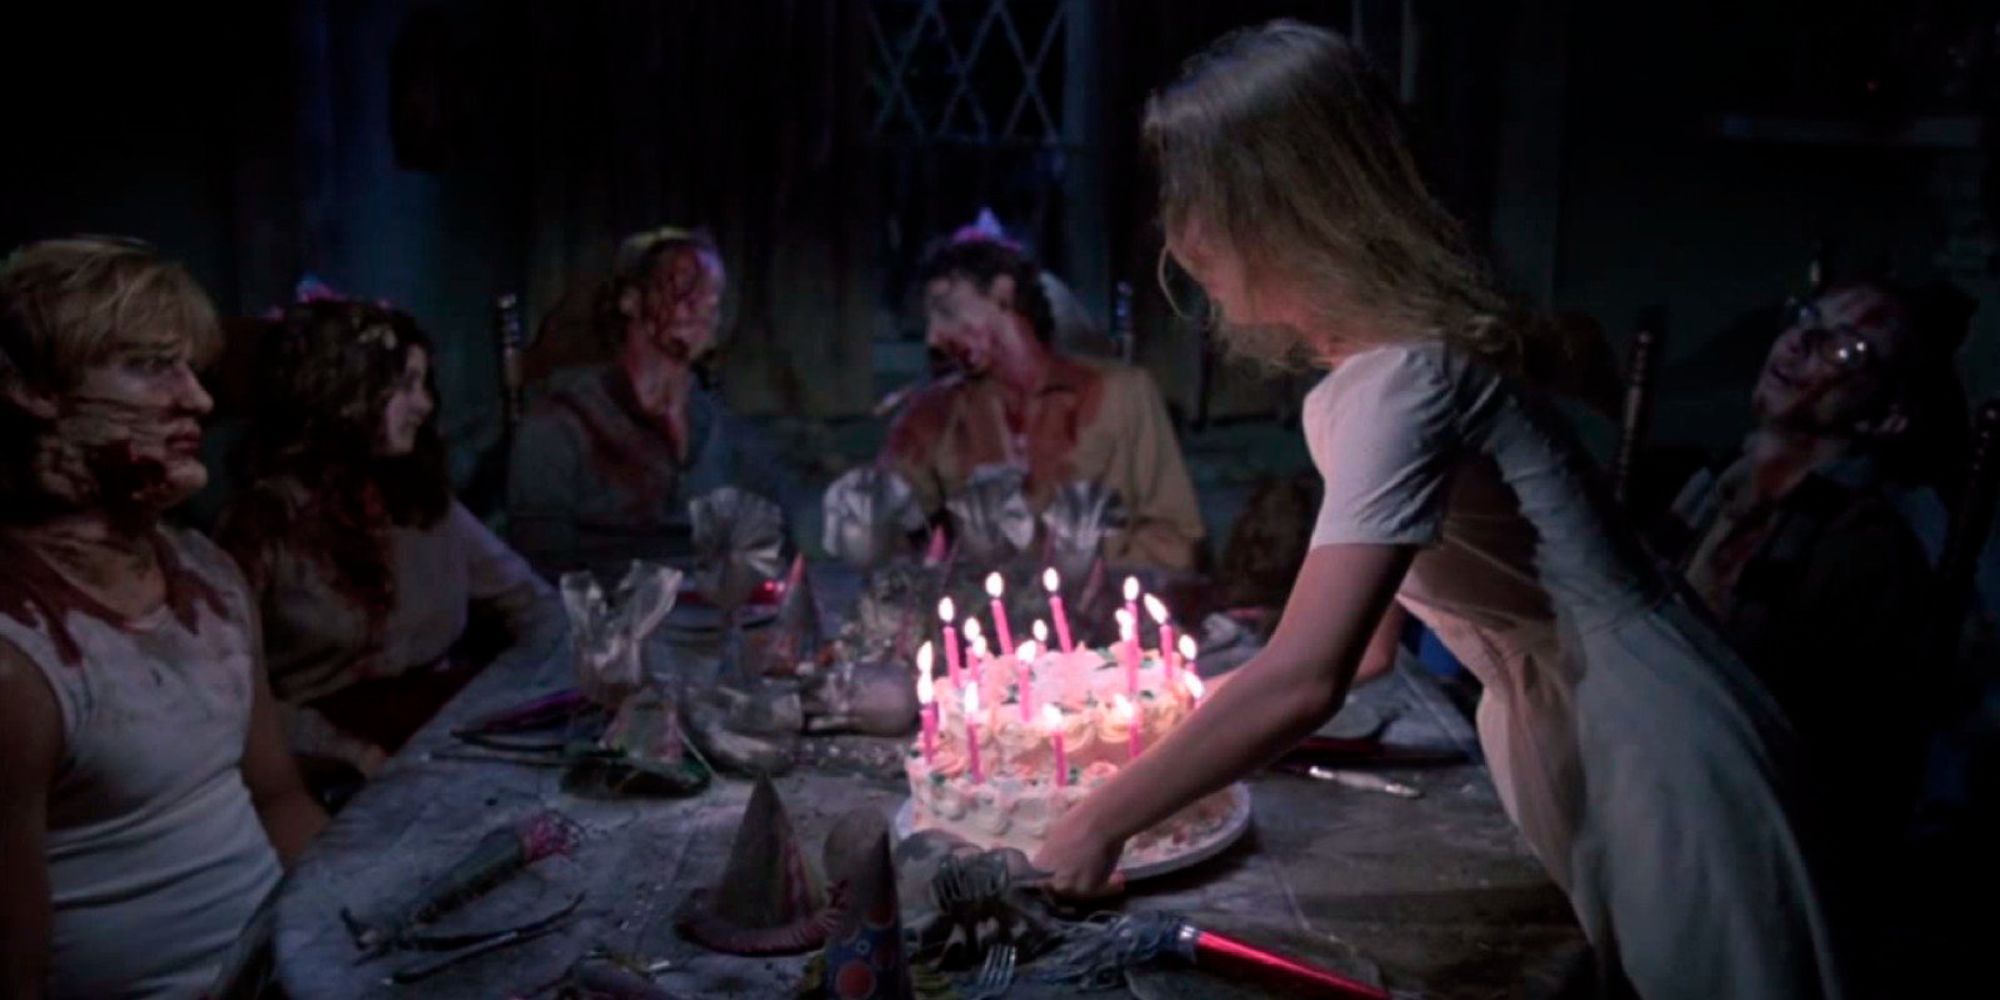 Melissa Sue Anderson, as Ginny Wainwright, serves a cake to her deceased friends in Happy Birthday To Me (1981)